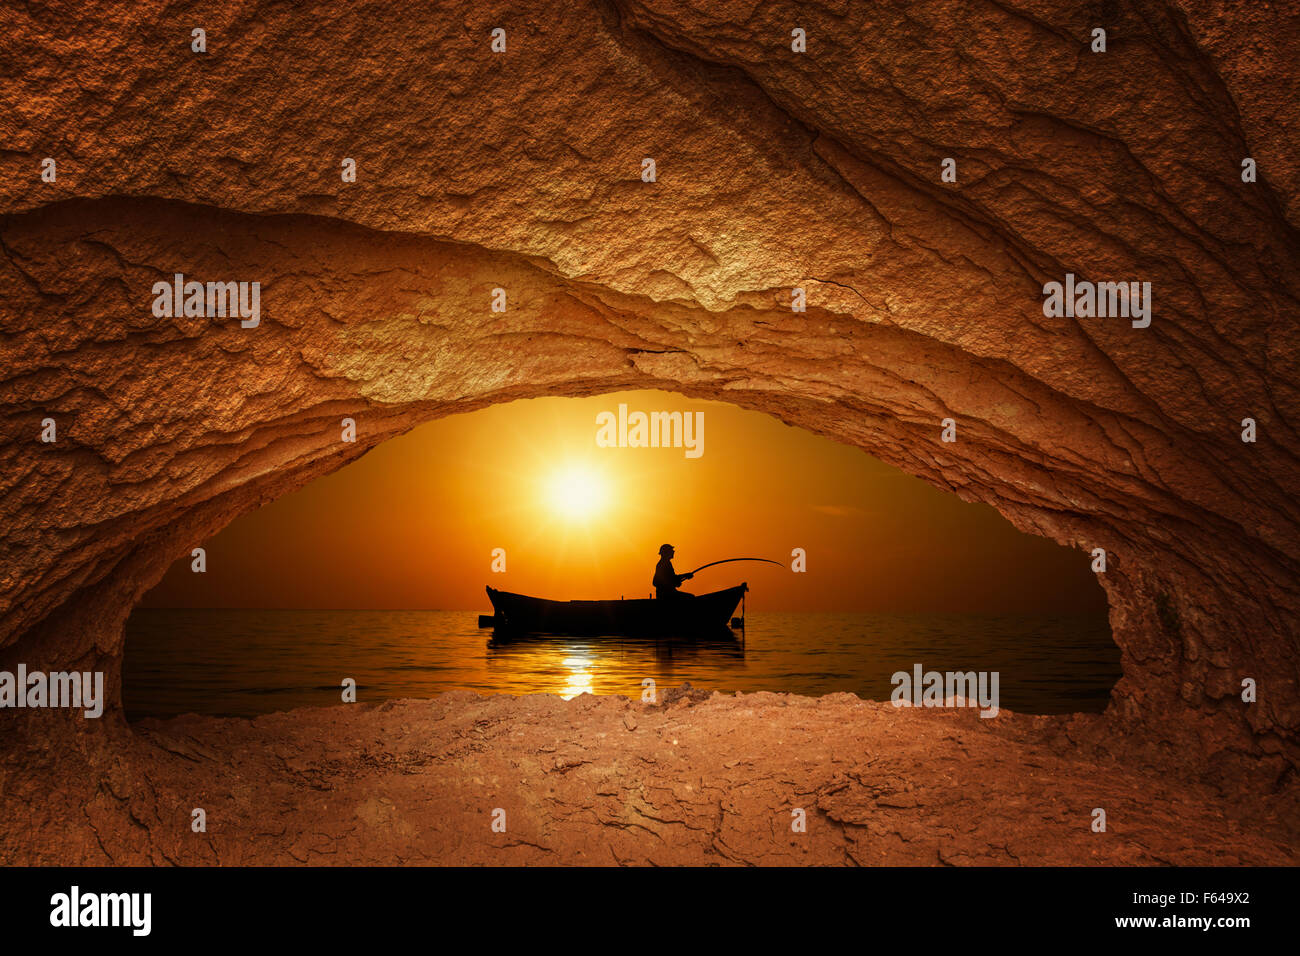 Thailand fisher boat at sunset Stock Photo